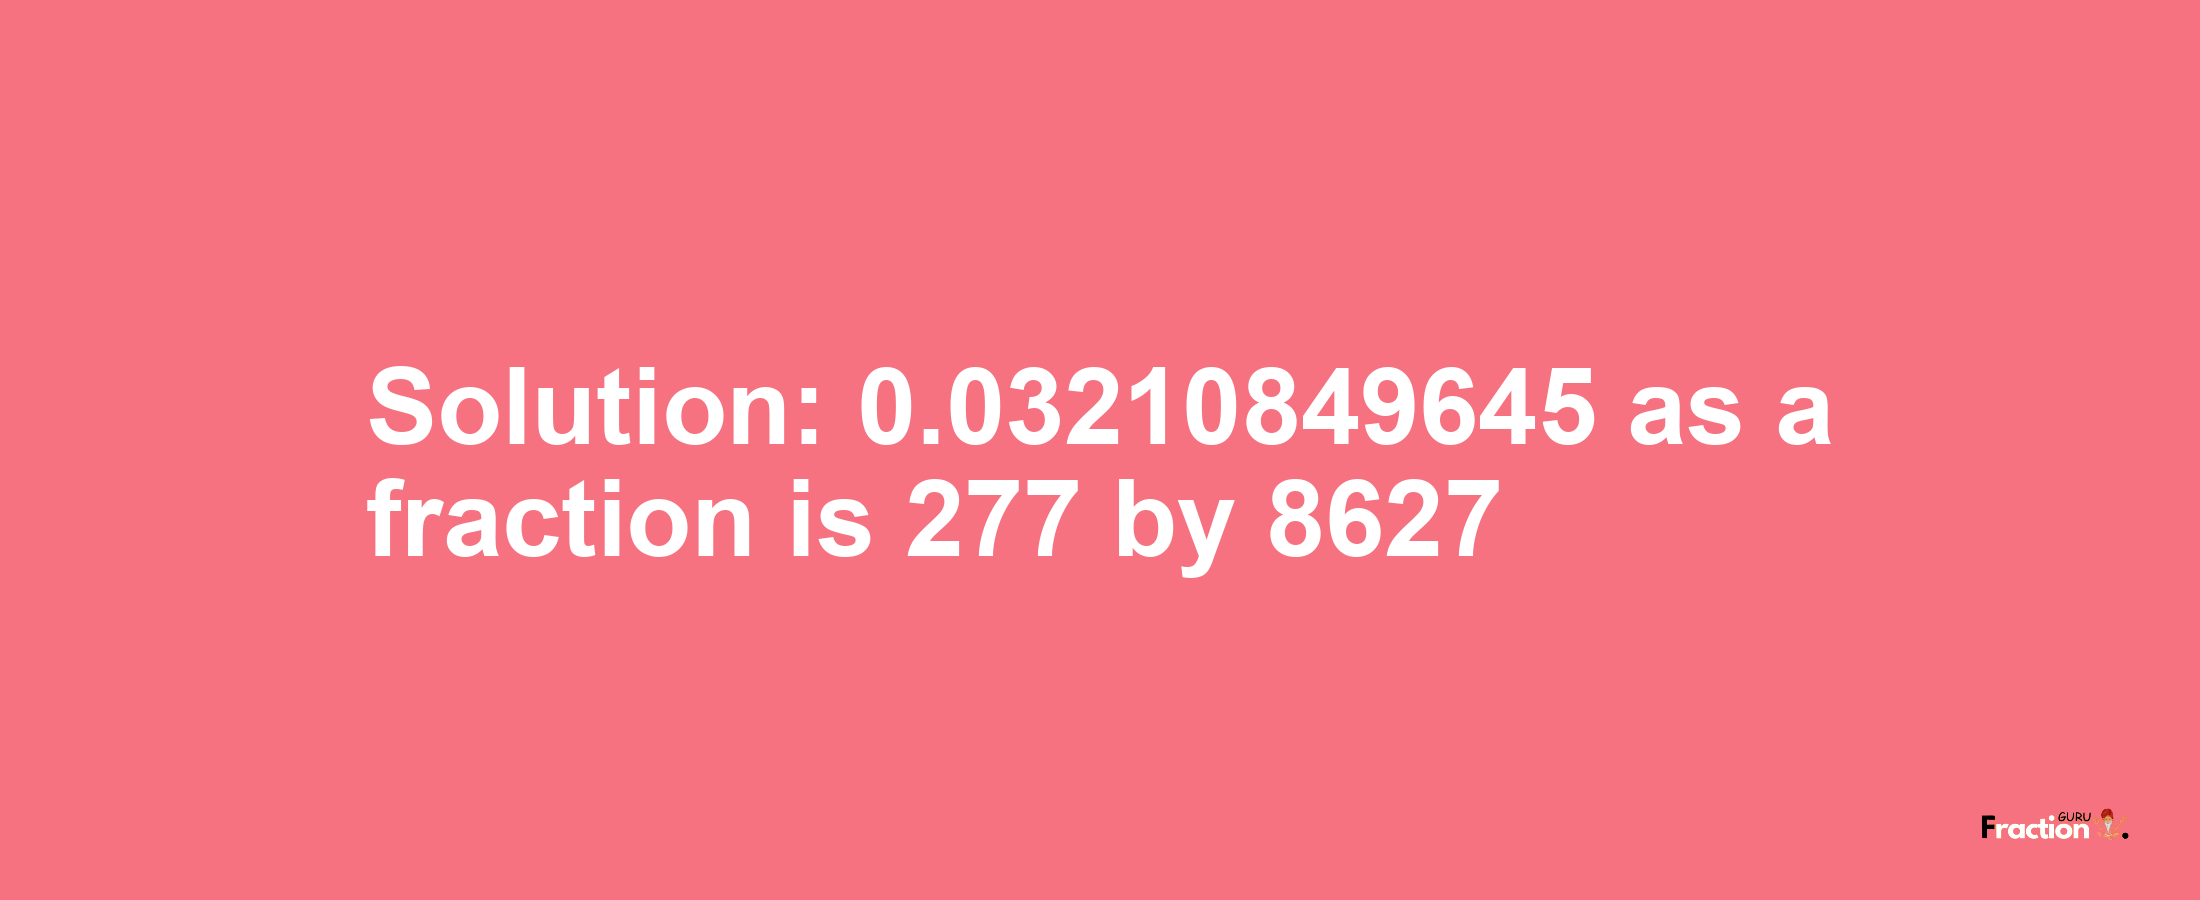 Solution:0.03210849645 as a fraction is 277/8627